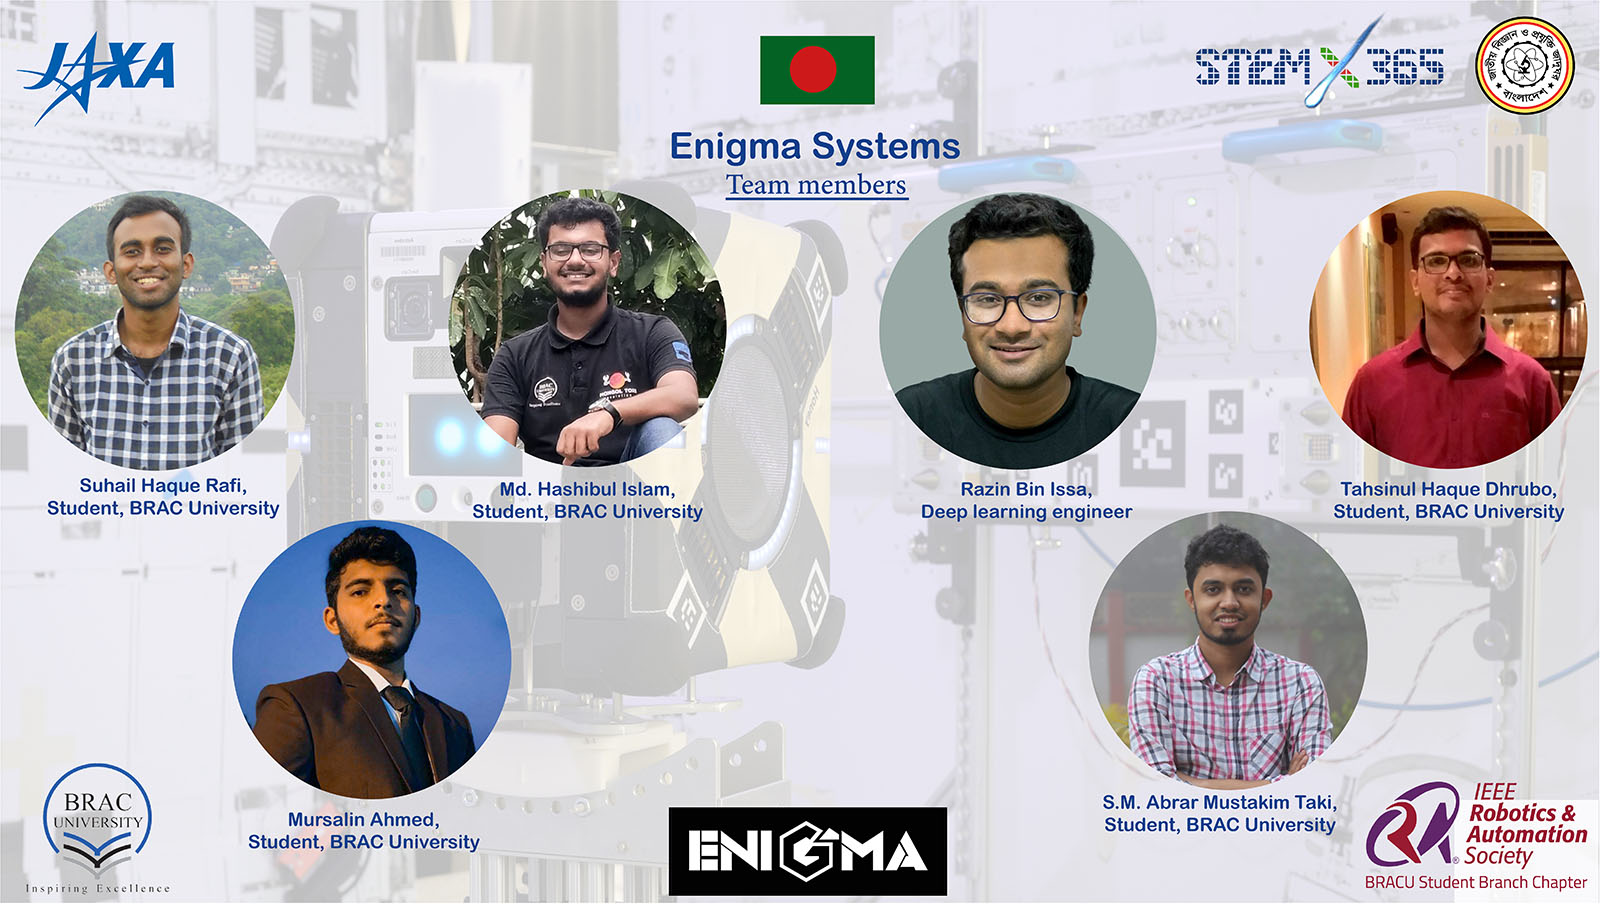 Enigma Systems